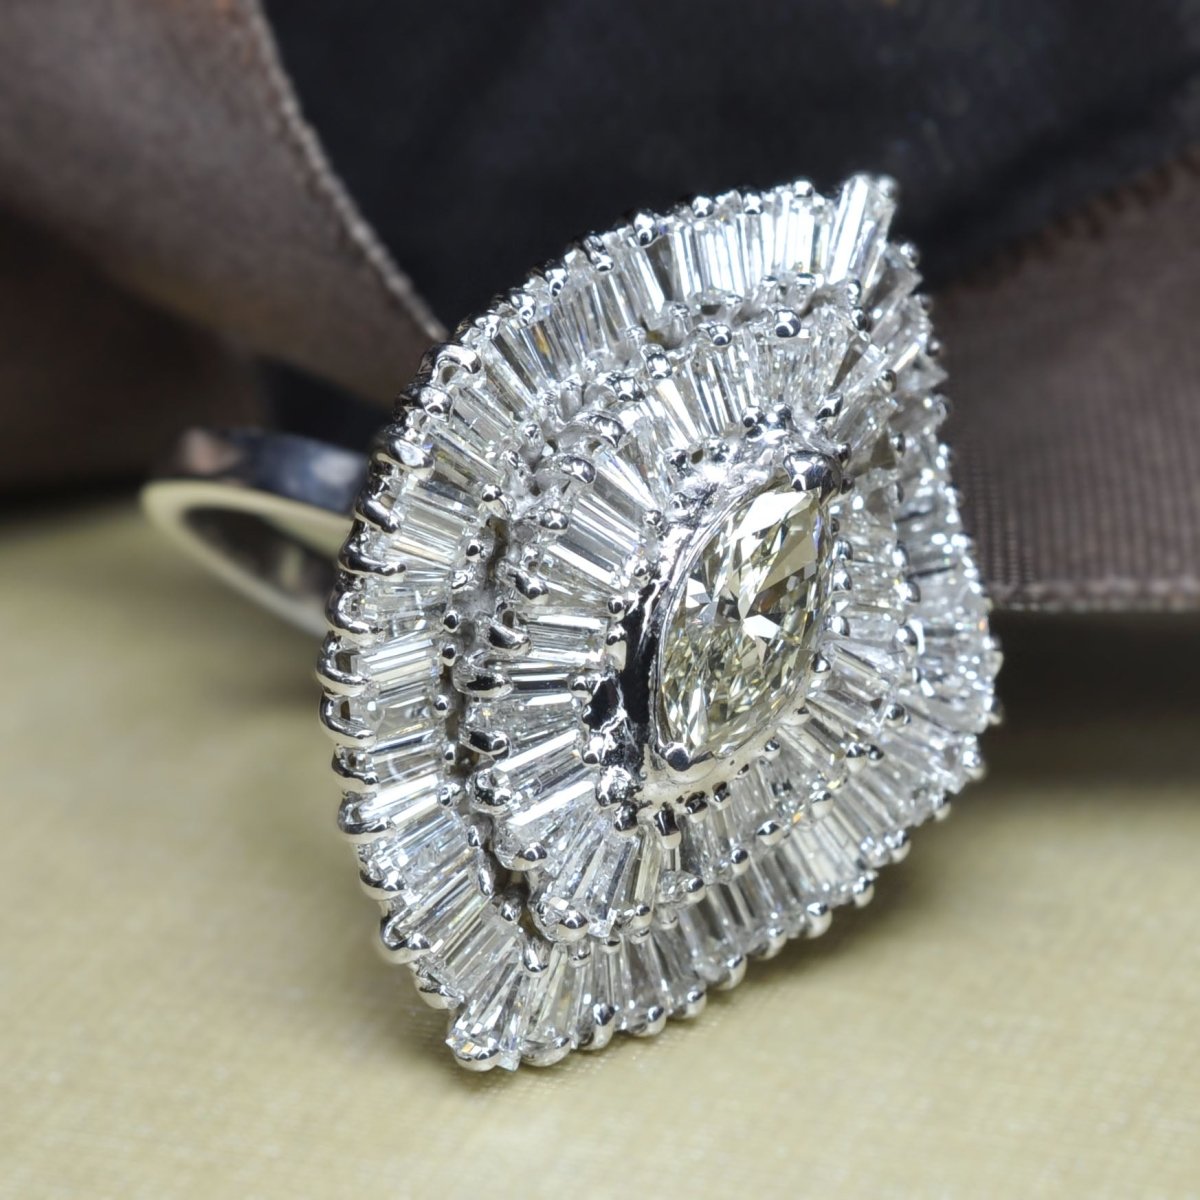 Certified 4.45CT Marquise and Baguette Cut Diamond Engagement Ring in 14KT White Gold - Primestyle.com